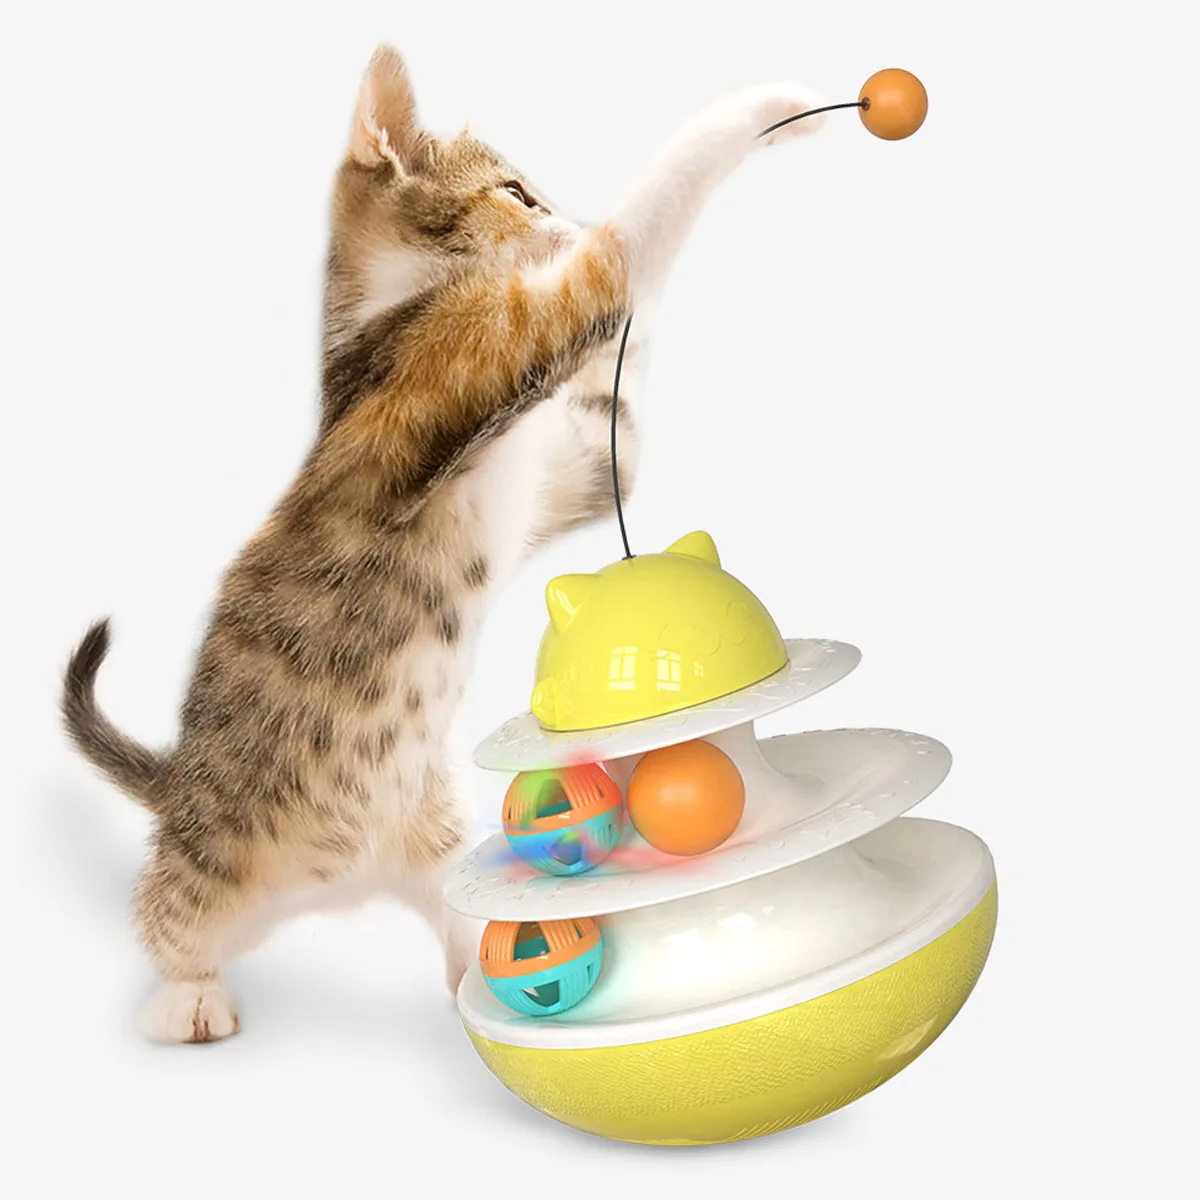 

Interactive 3 Levels Cats Pet Cat Roller Ball Toy Tower Turntable Three Layer Pet Play Disk Cat Toy Tower, Picture showed